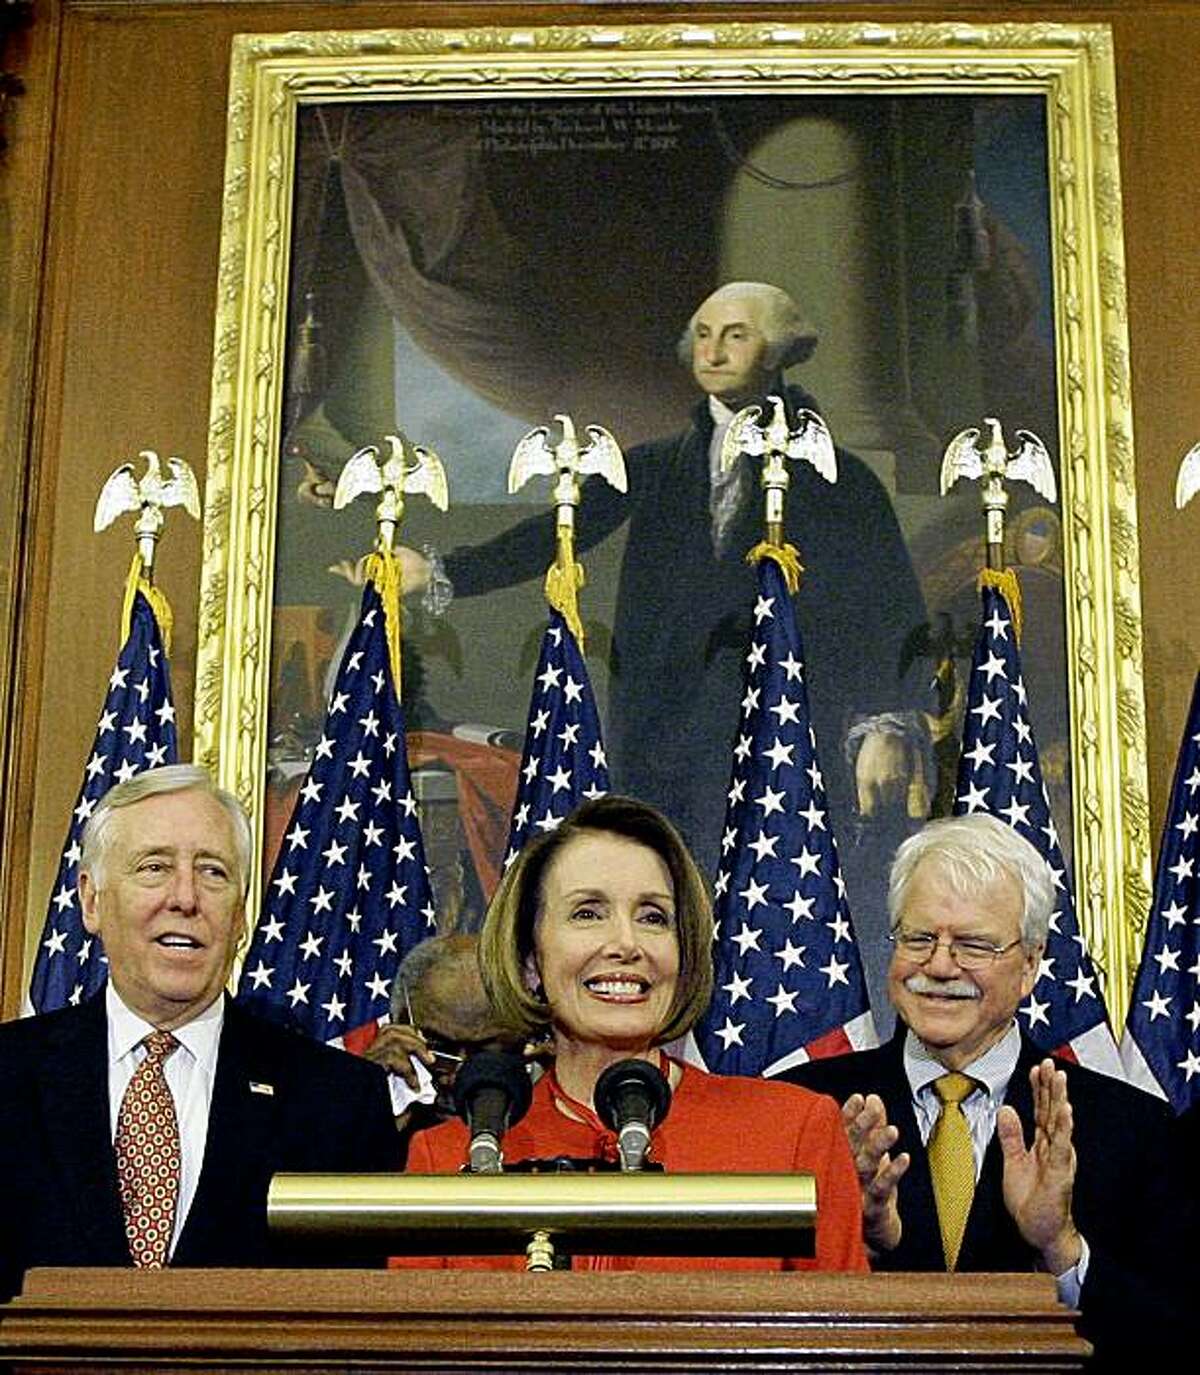 Speaker Nancy Pelosi, center, is joined by (L-R) House Majority Leader Steny Hoyer and Rep. George Miller, D-Calif. during a press conference at the U.S. Capitol, Saturday, Nov. 7, 2009 in Washington after the passage in the house of the health care reform bill. at the U.S. Capitol, Saturday, Nov. 7, 2009 in Washington. (AP Photo/Alex Brandon)